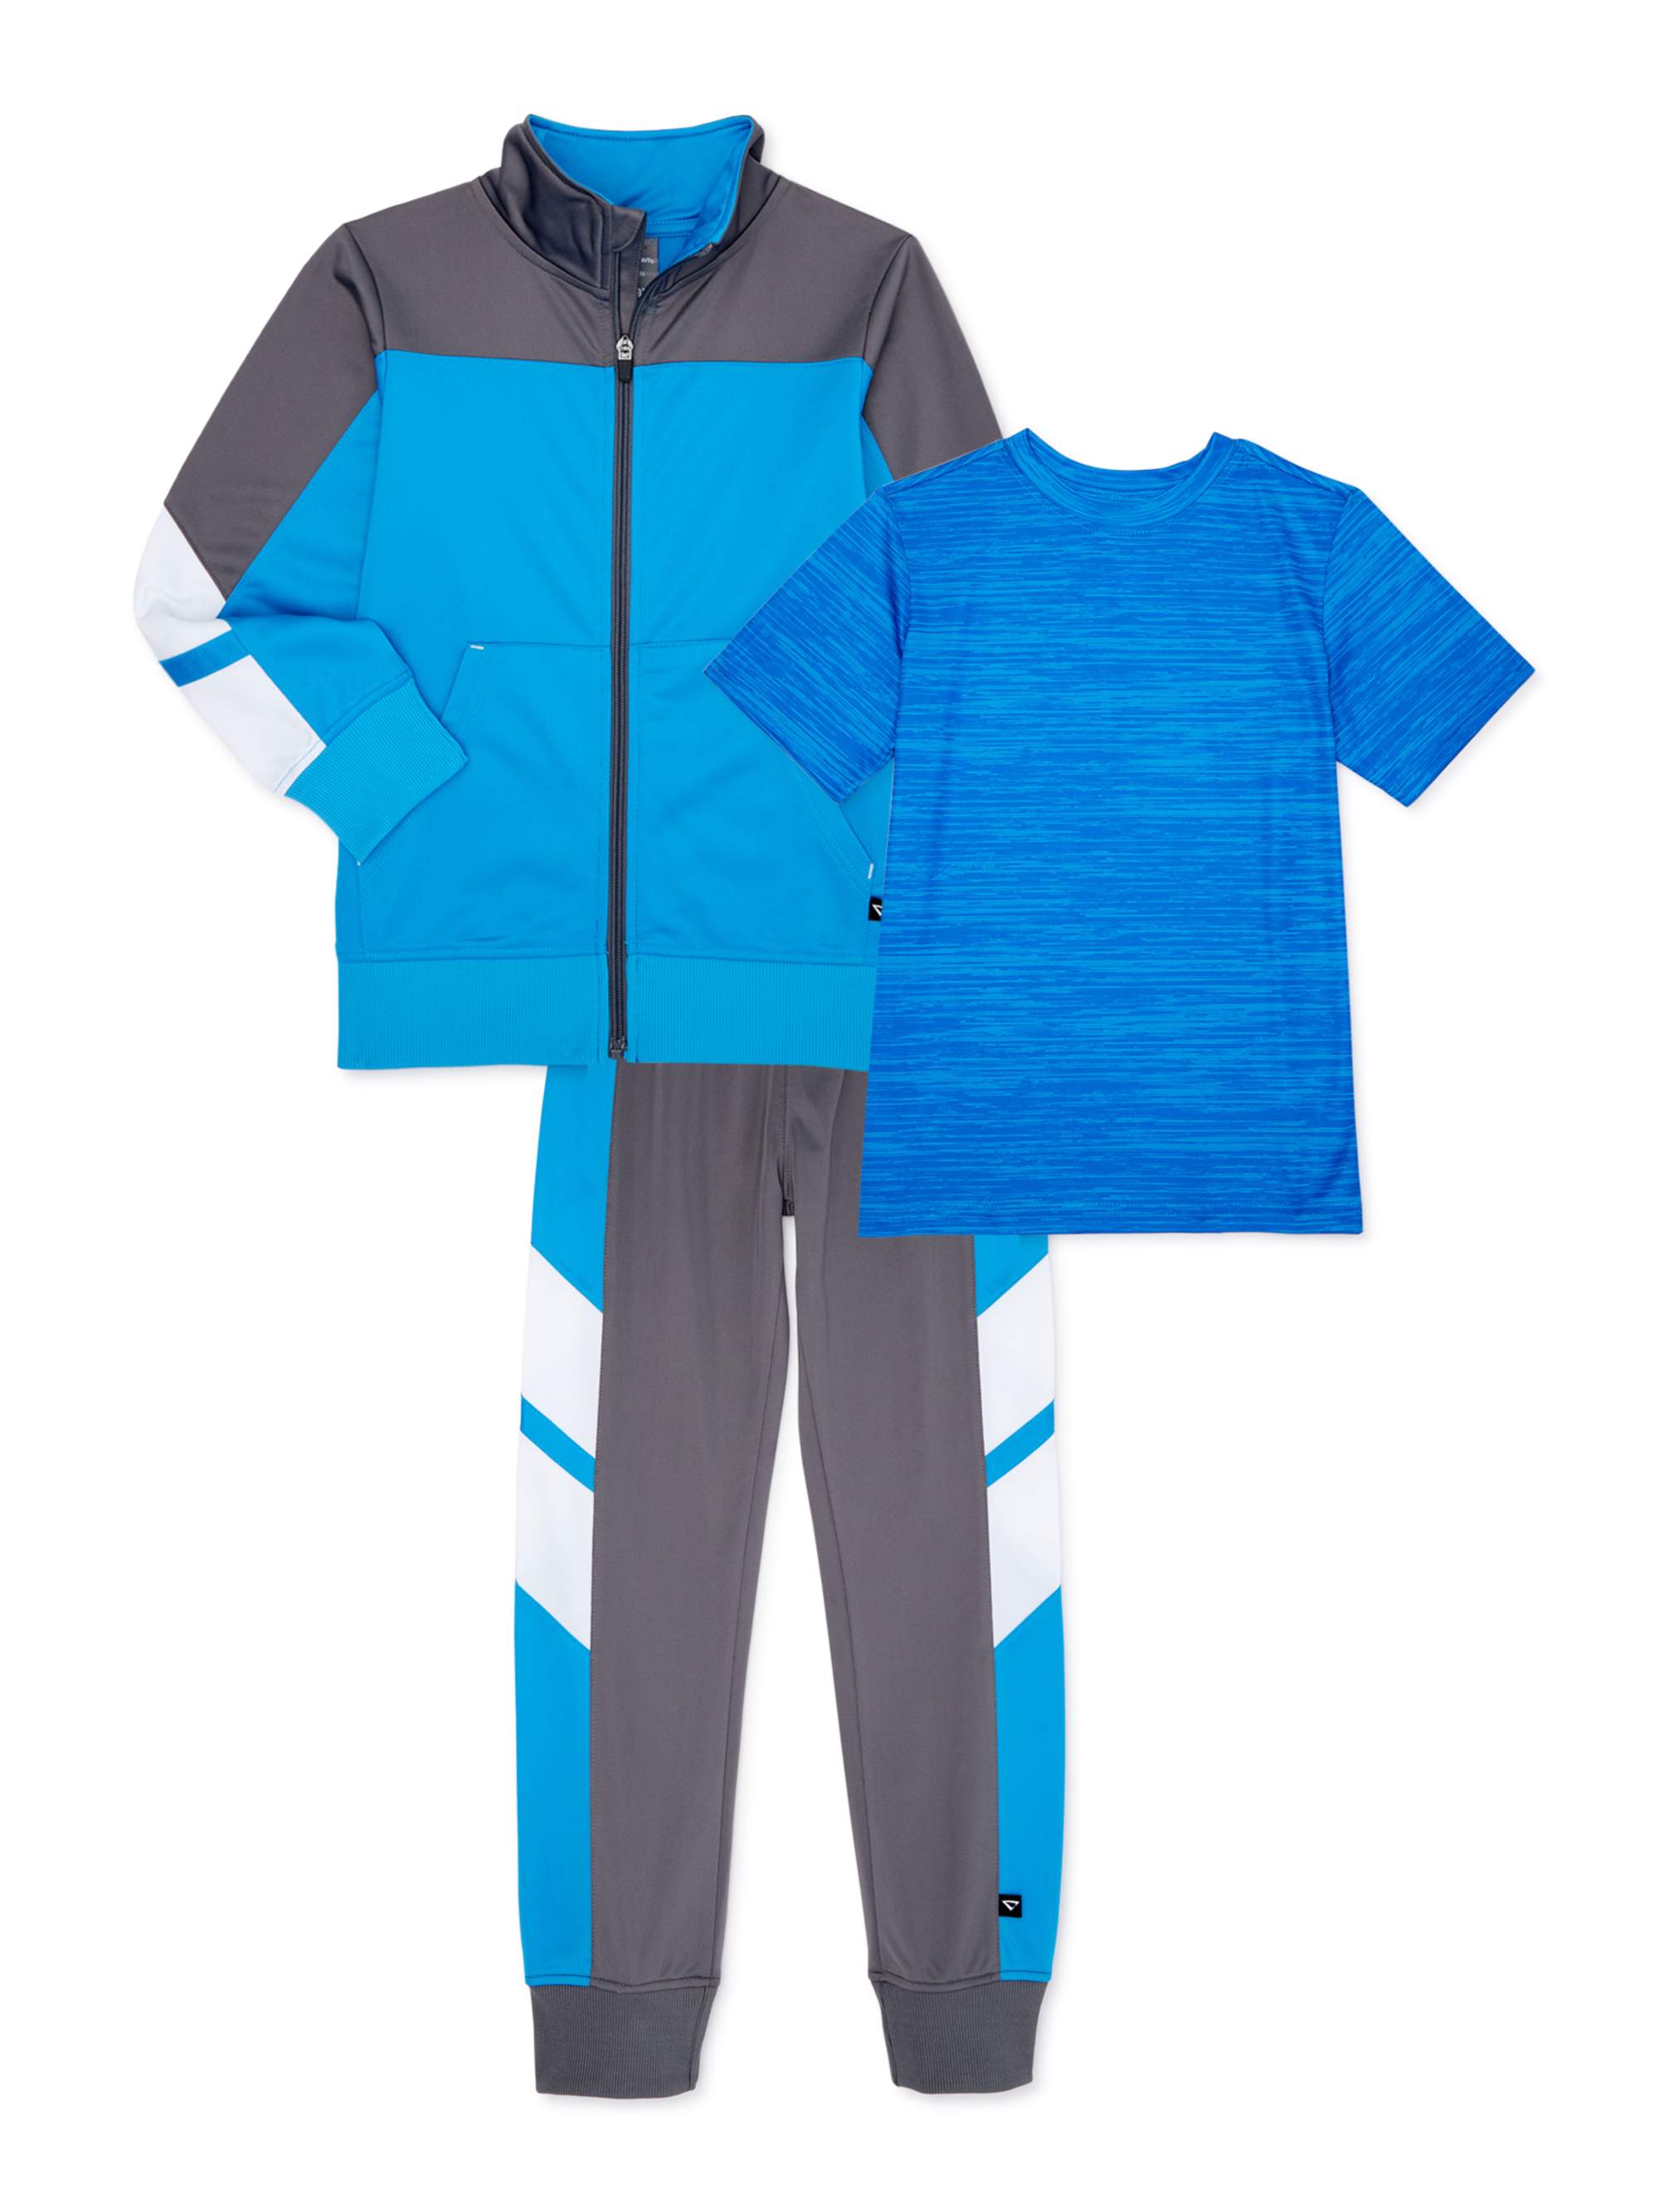 Cheetah Boys Tricot Jacket, Joggers and Performance T-Shirt, 3-Piece Athletic Set, Sizes 2T-18 & Husky - image 1 of 5